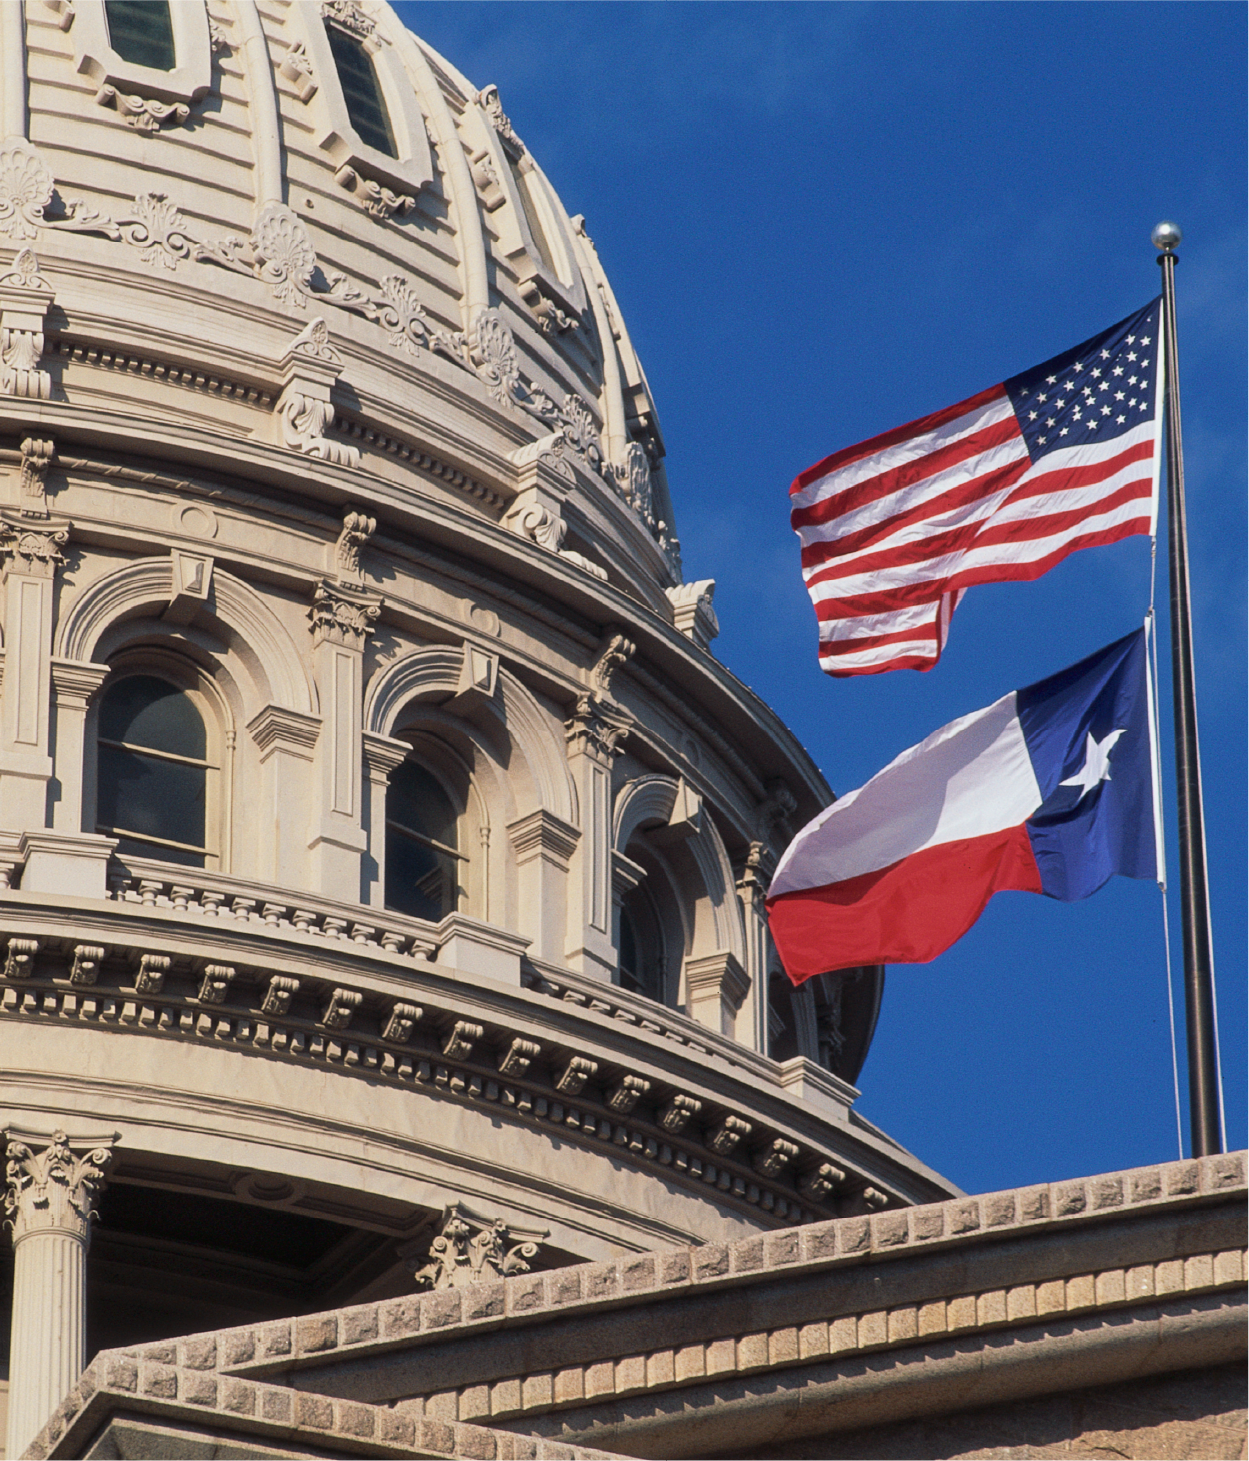 Texas capitol building with American and Texas flags blowing in the wind